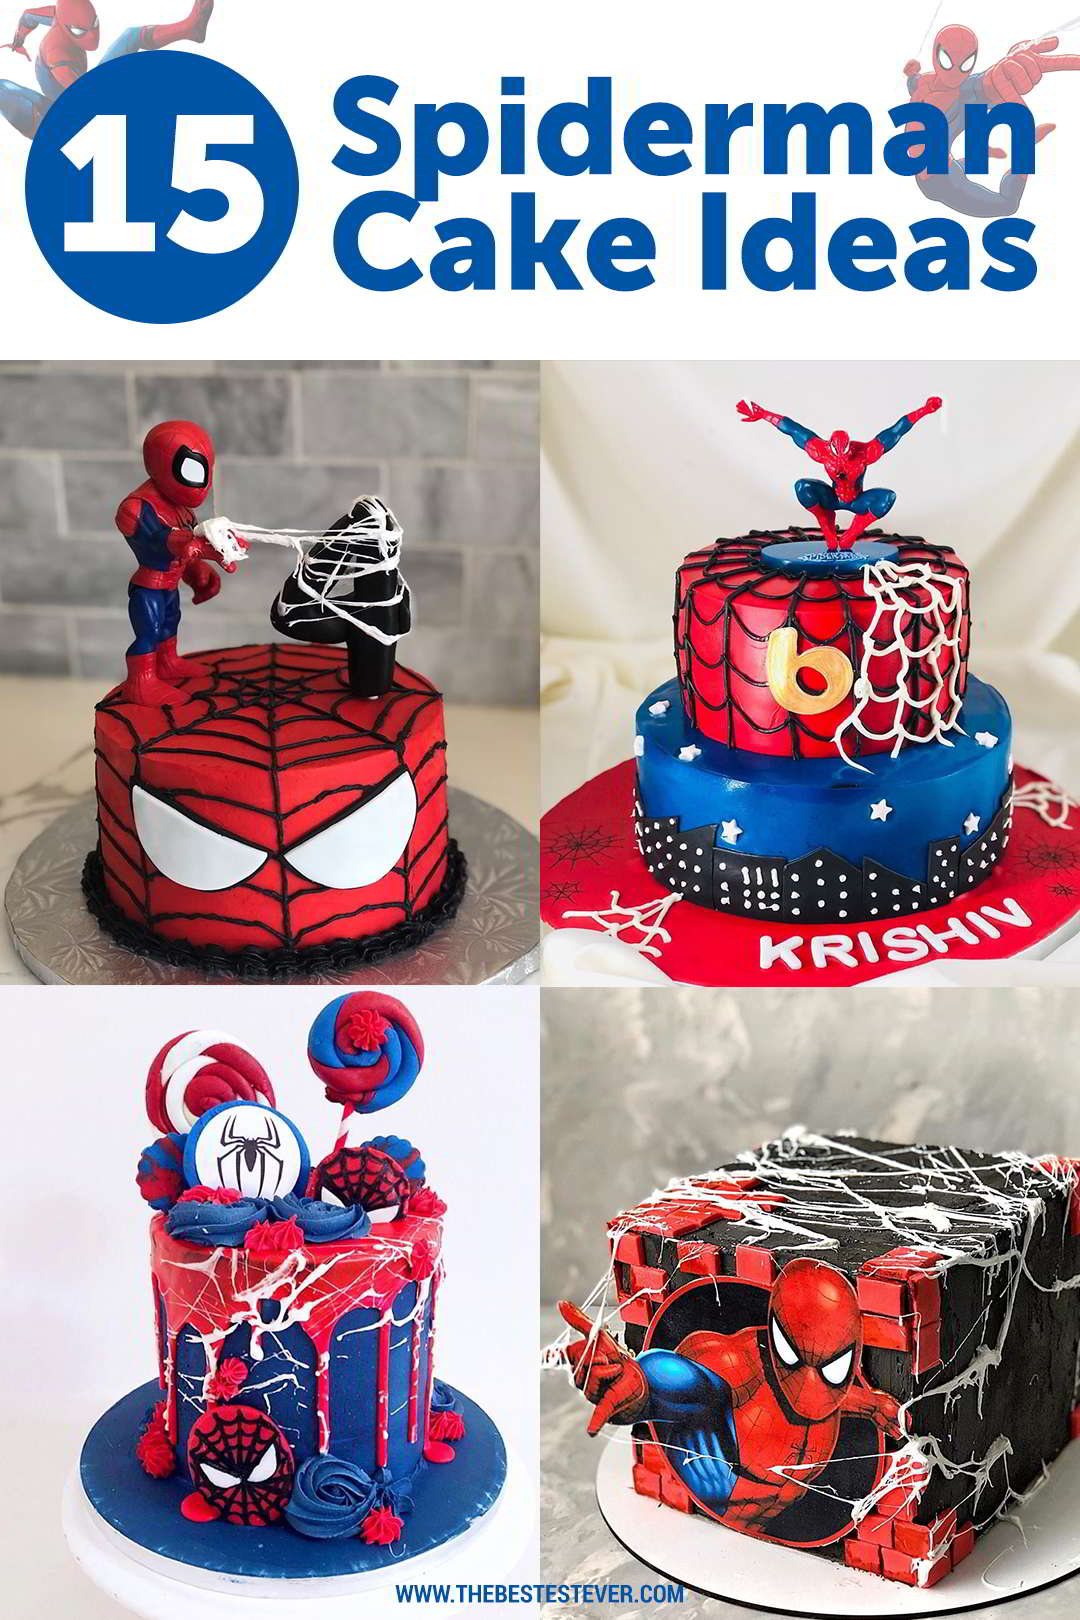 HowToCookThat : Cakes, Dessert & Chocolate | 3D Spiderman Cake Tutorial -  HowToCookThat : Cakes, Dessert & Chocolate